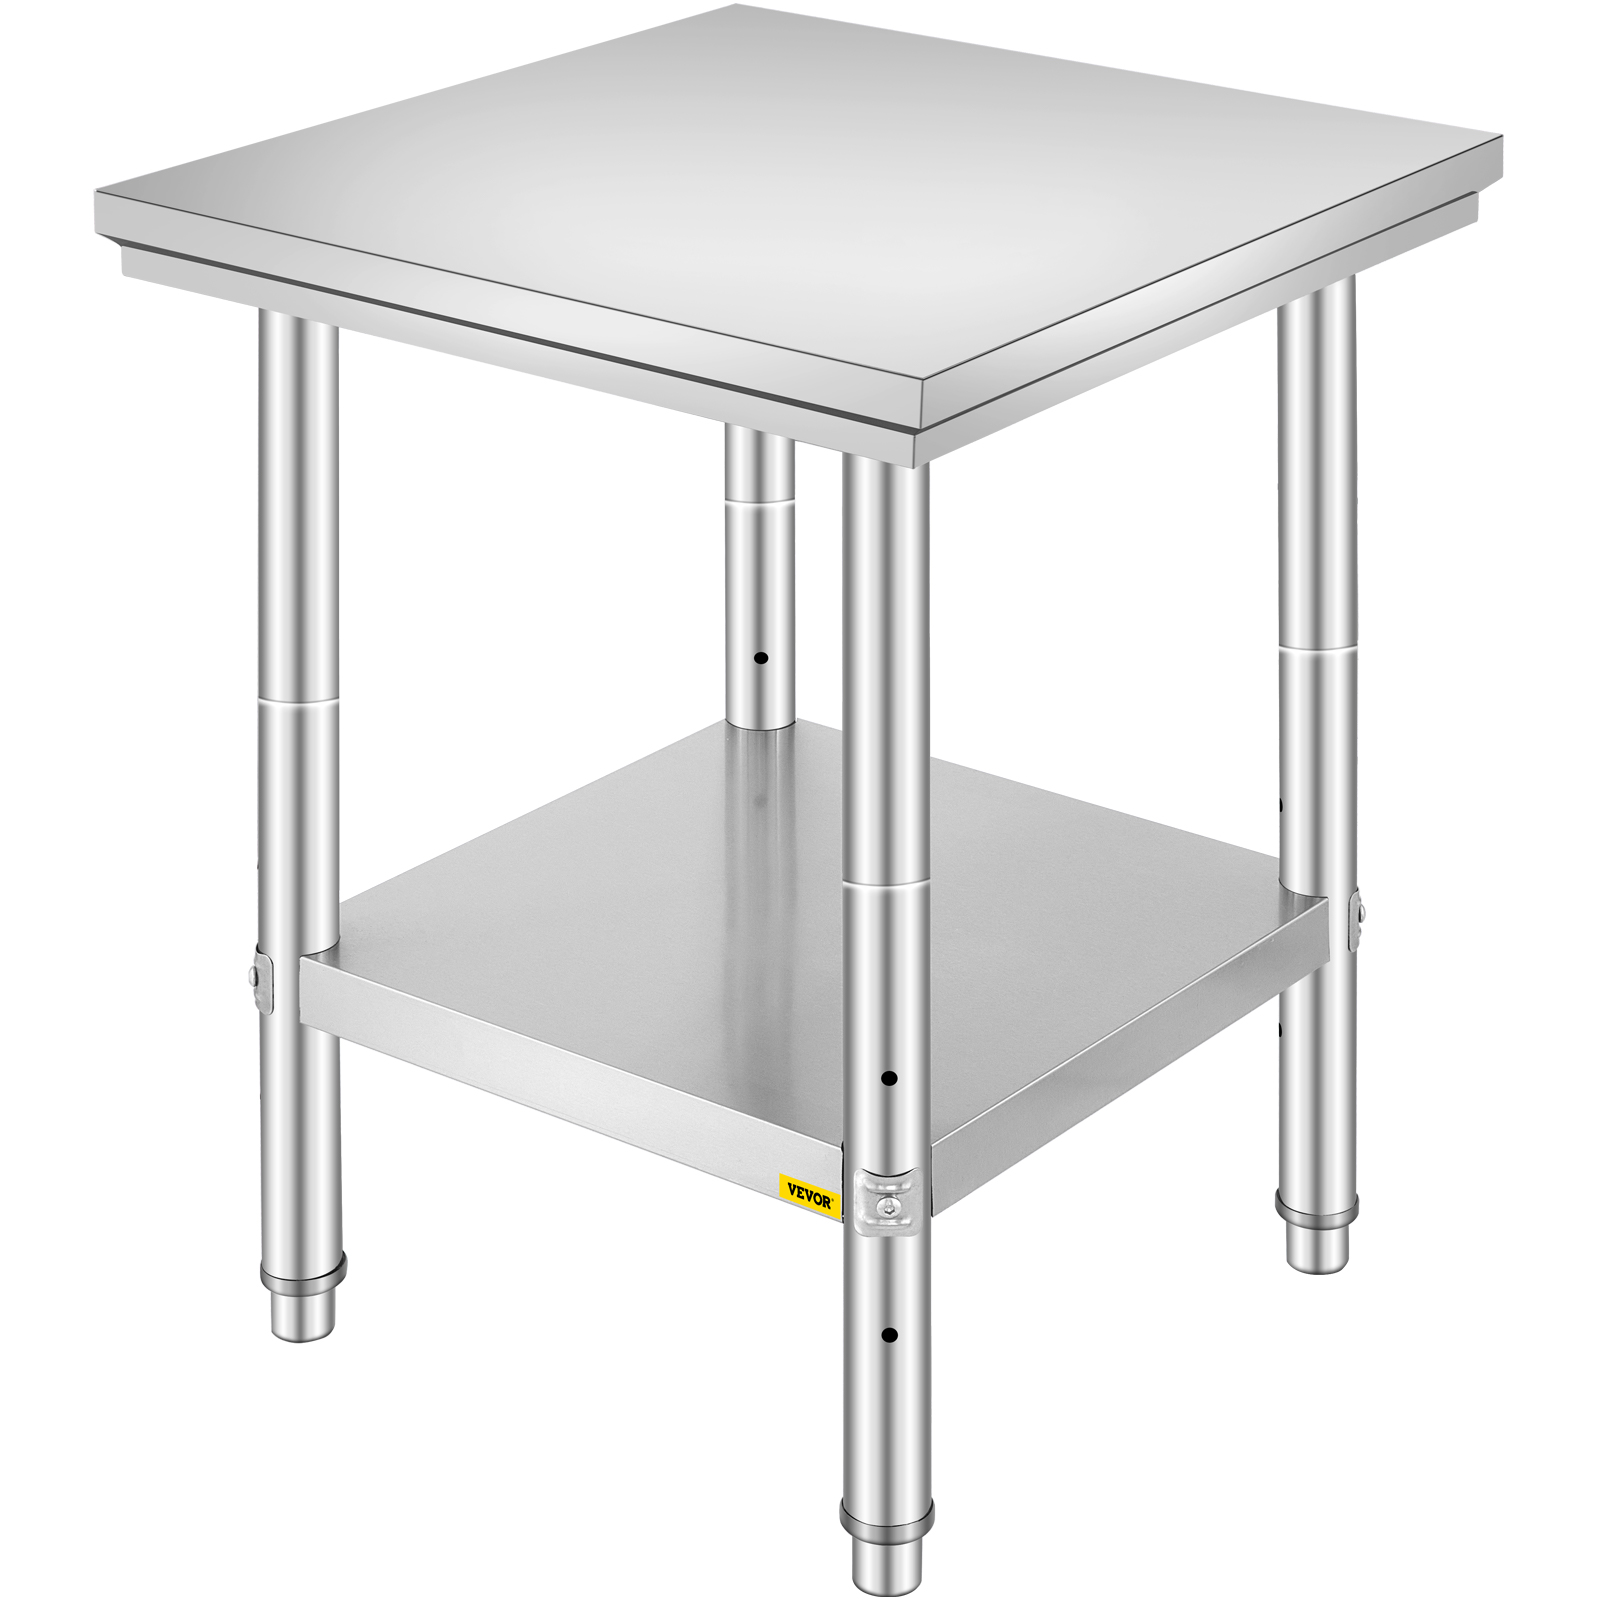 Commercial Kitchen Heavy Duty Table with Adjustable Undershelf and Table Foot for Restaurant Cozyel Stainless Steel Table for Prep & Work 24x24 Inches Home and Hotel 